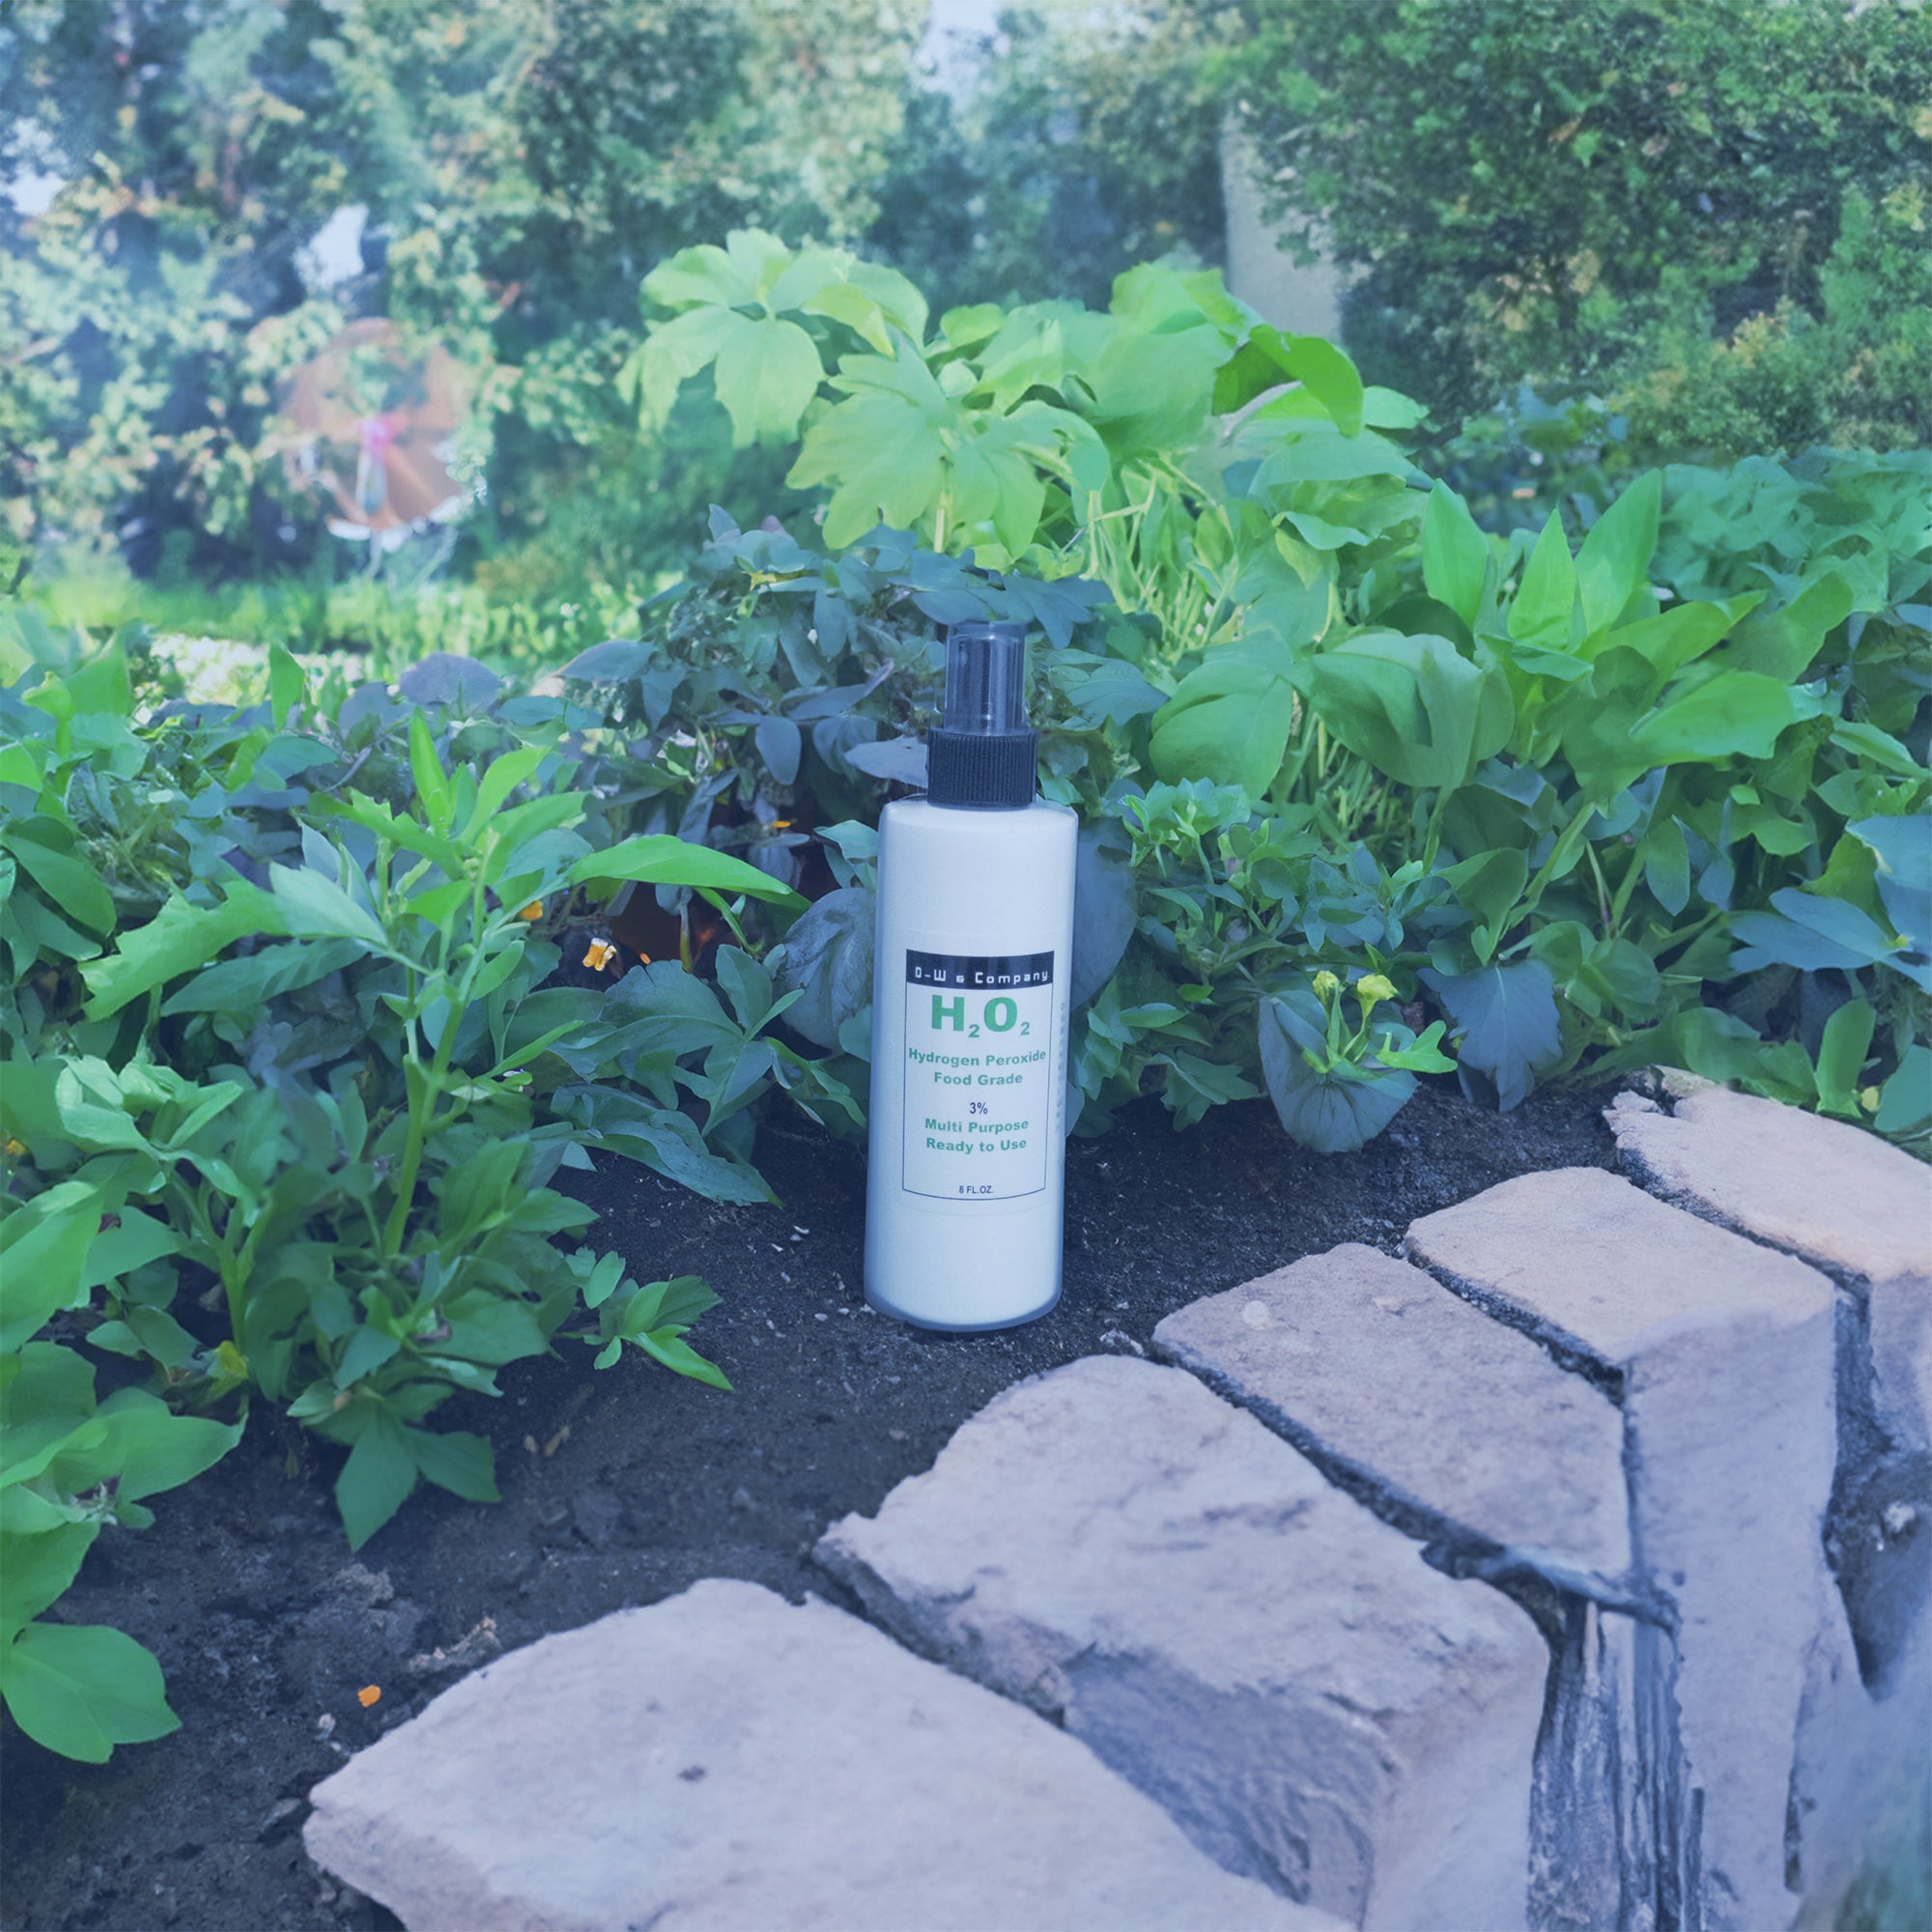 A bottle of Hydrogen Peroxide in a garden because it has uses throughout the house and yard